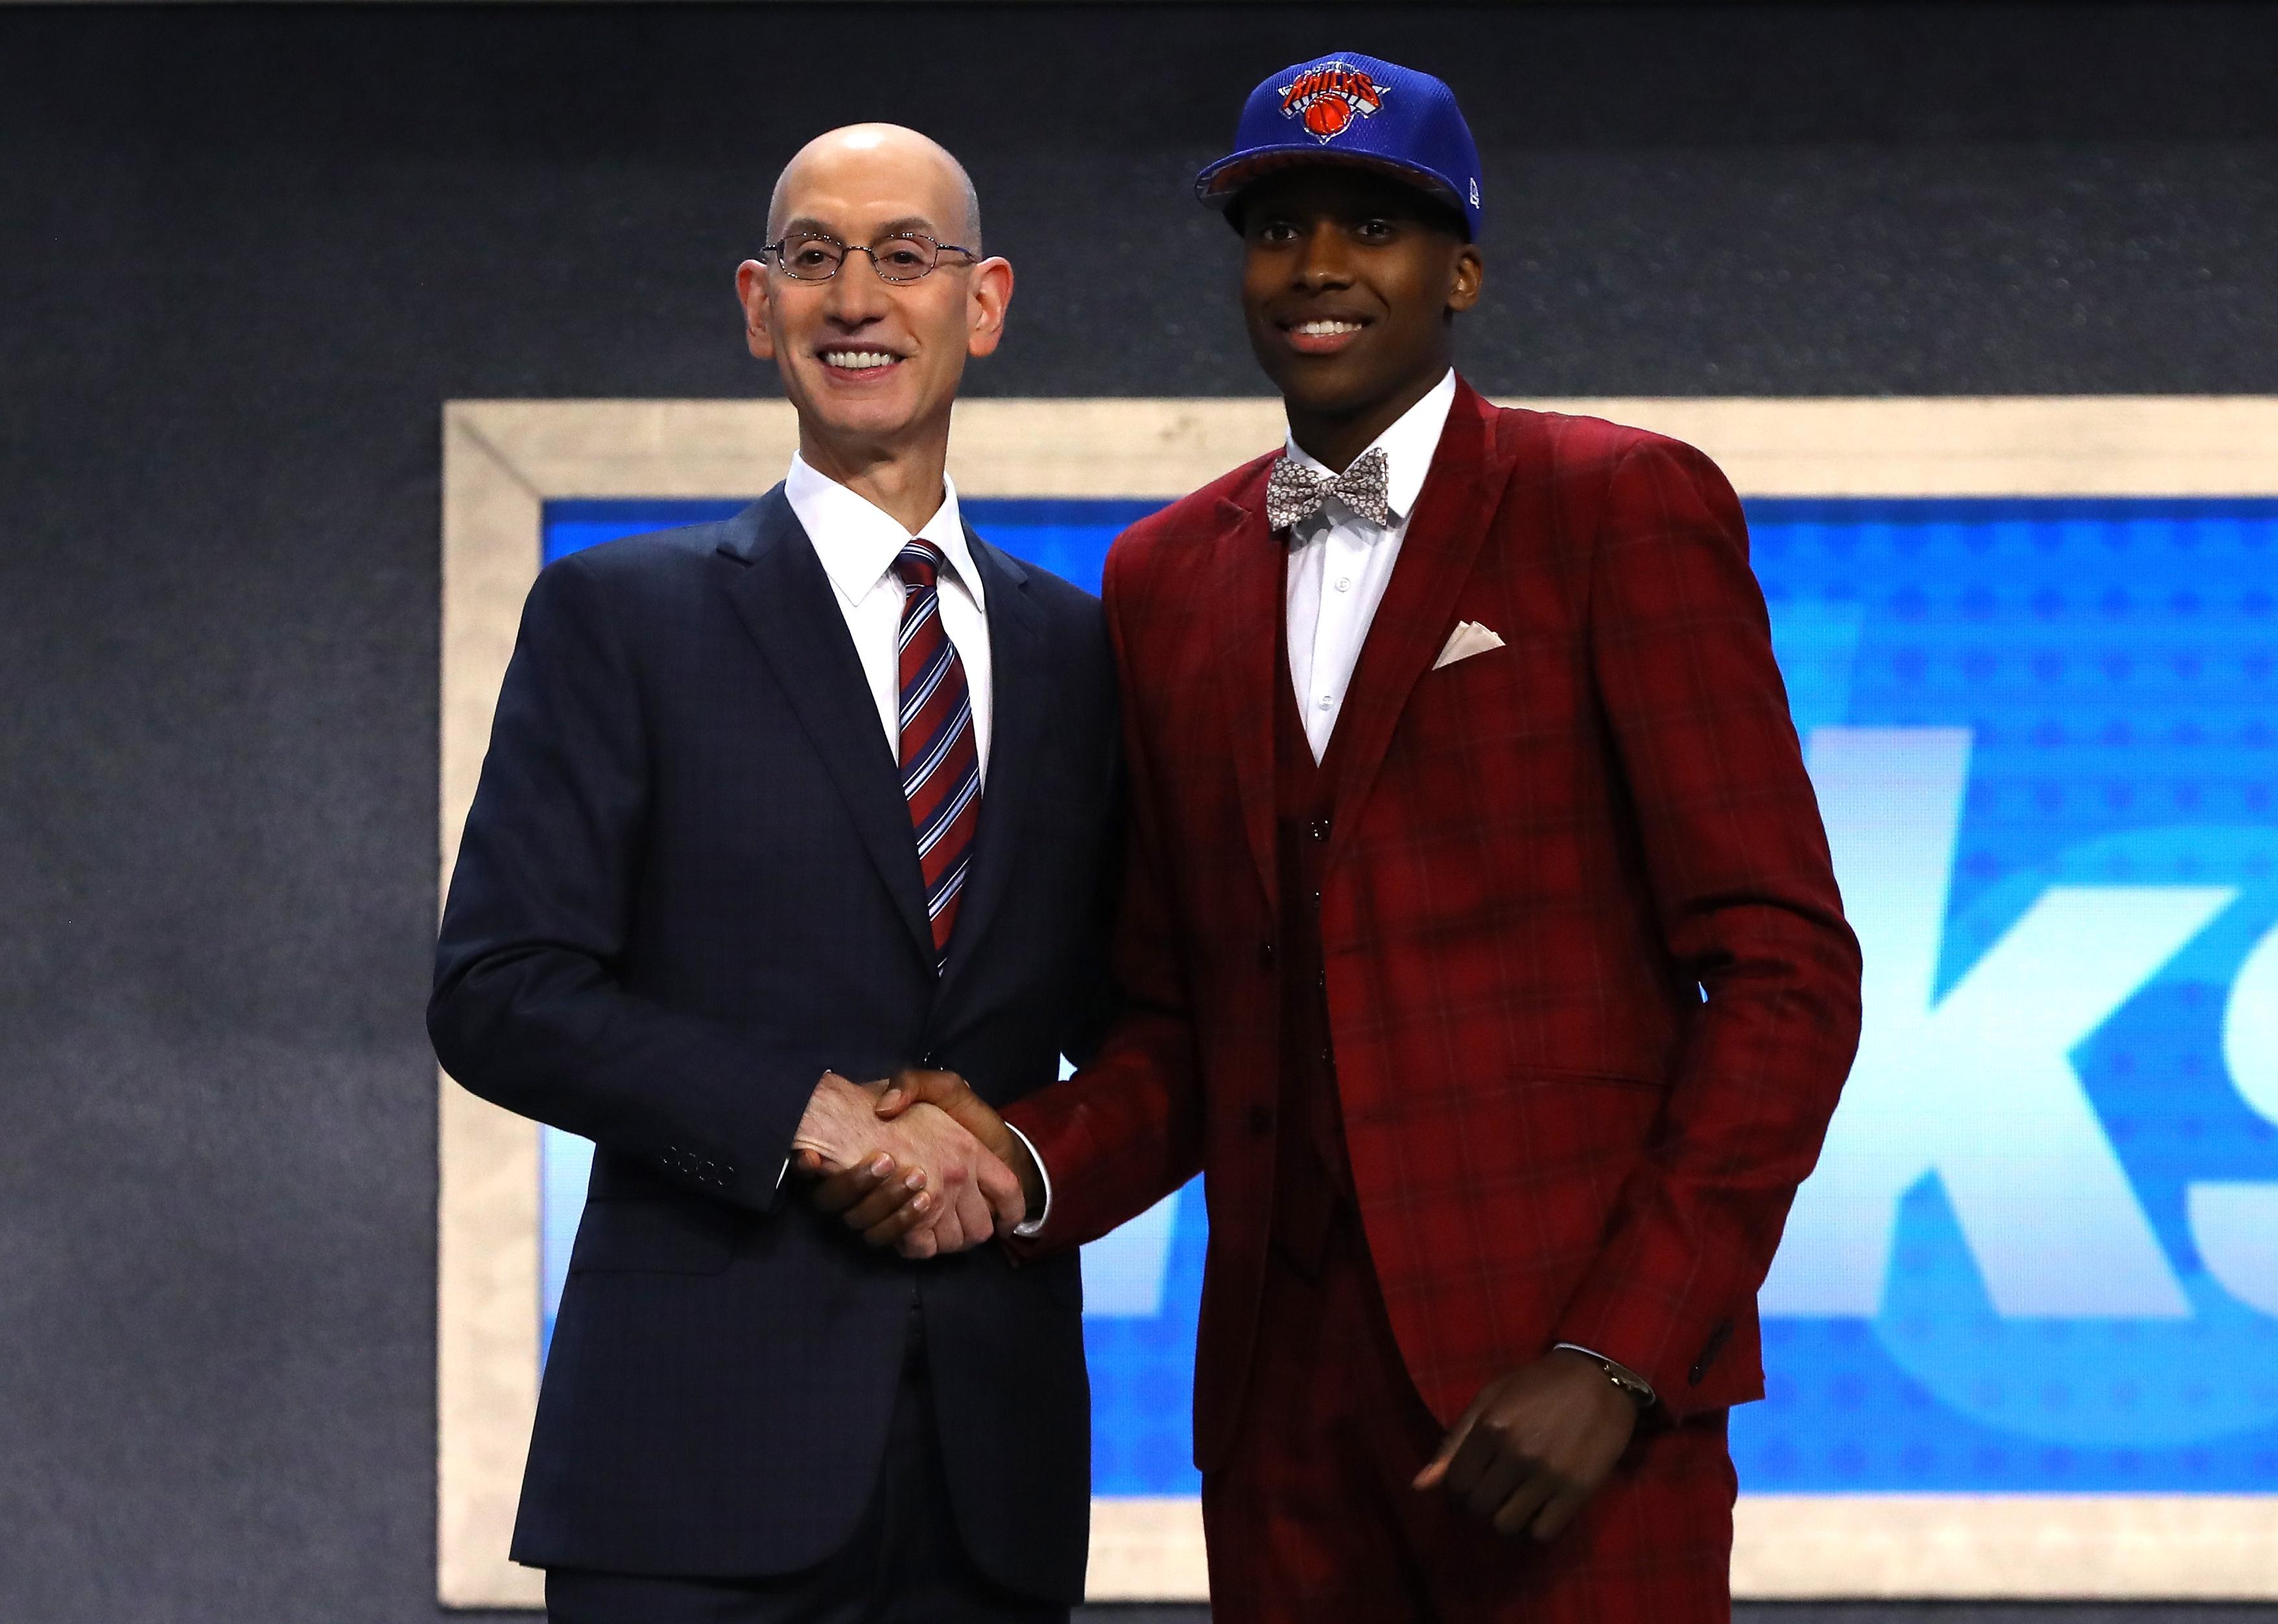 Frank Ntilikina on stage with NBA commissioner Adam Silver after being drafted.